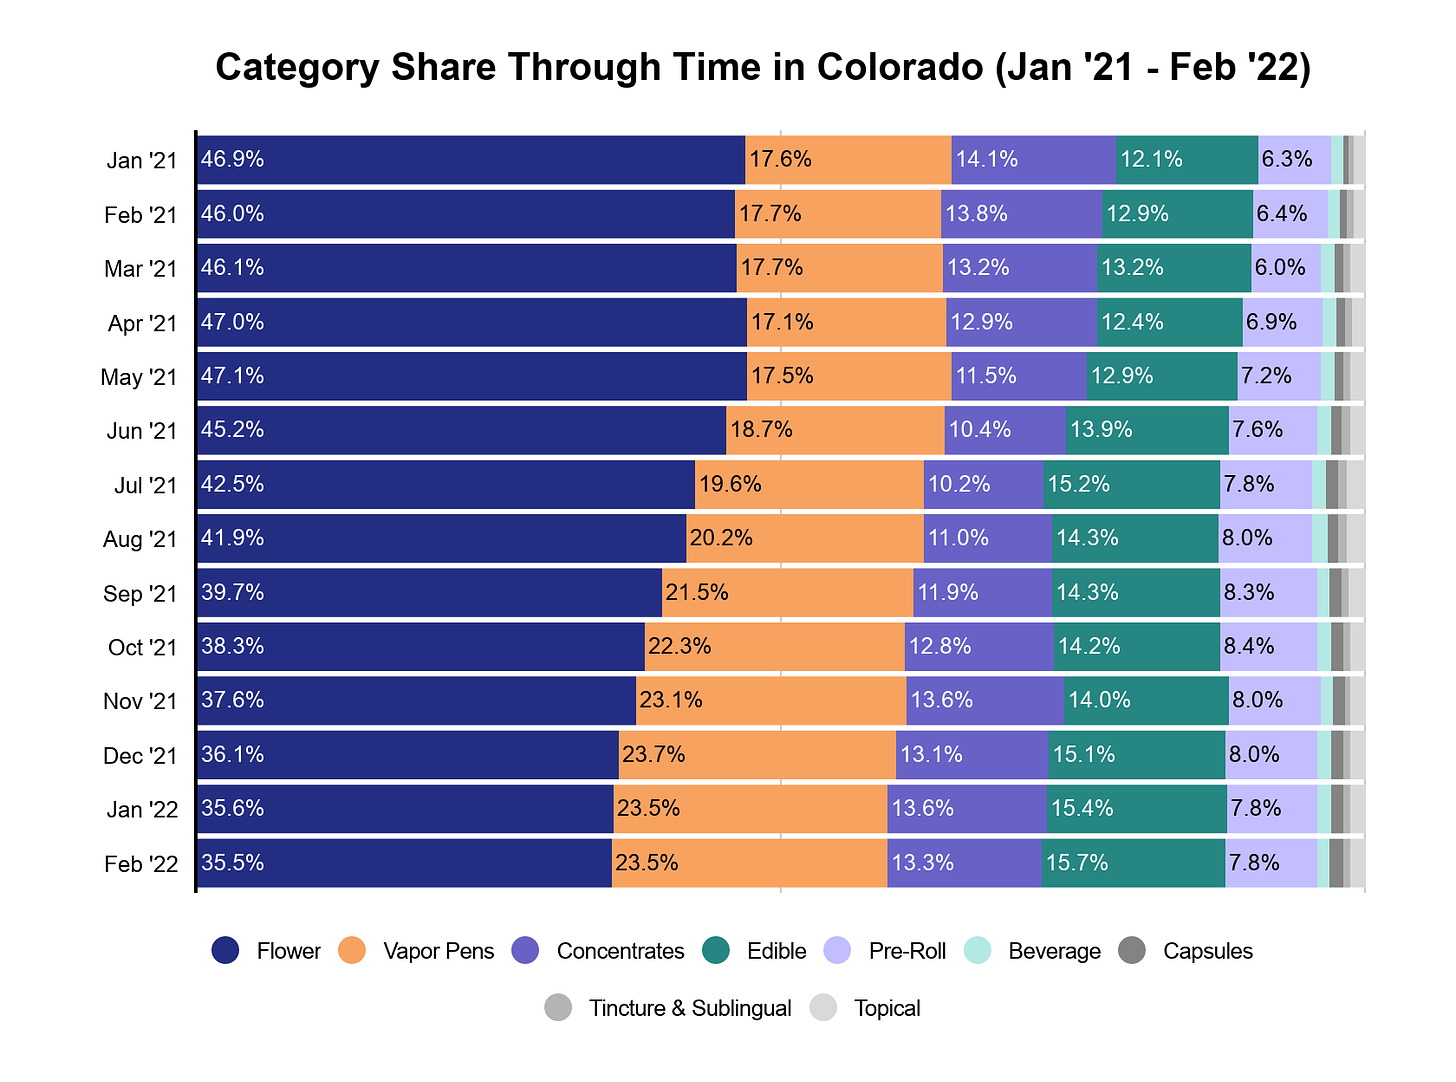 Colorado adult-use cannabis sales image 3: Category share through time